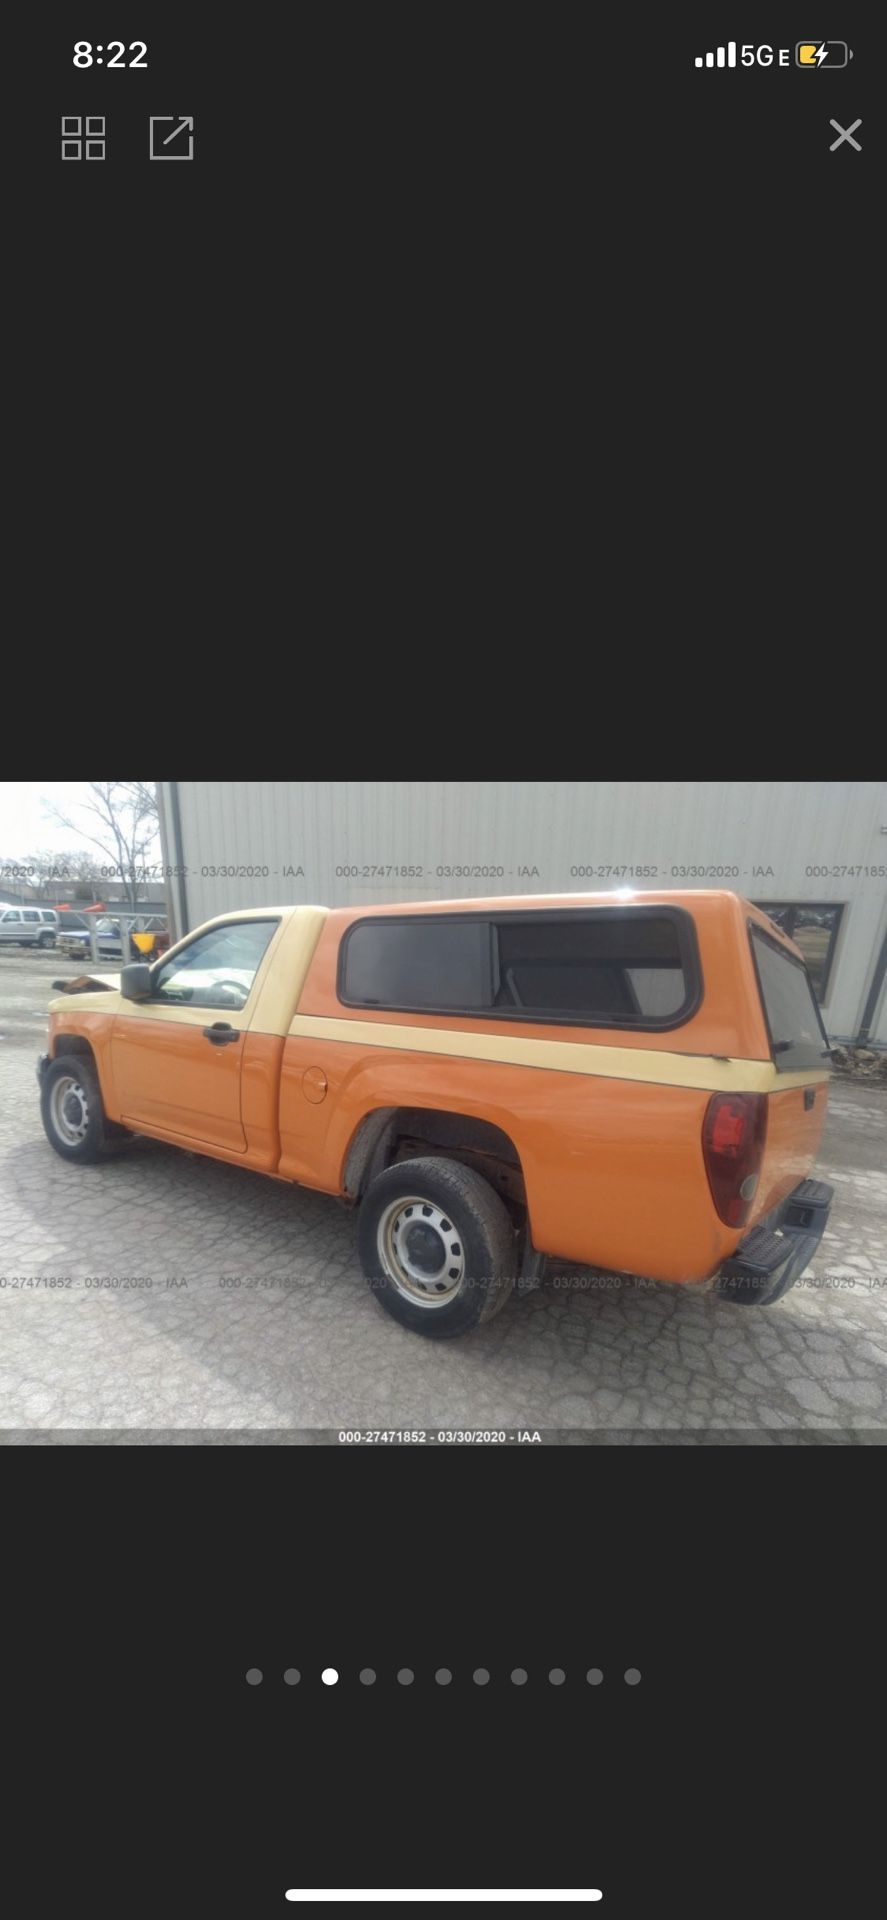 2012 Chevy Colorado part out